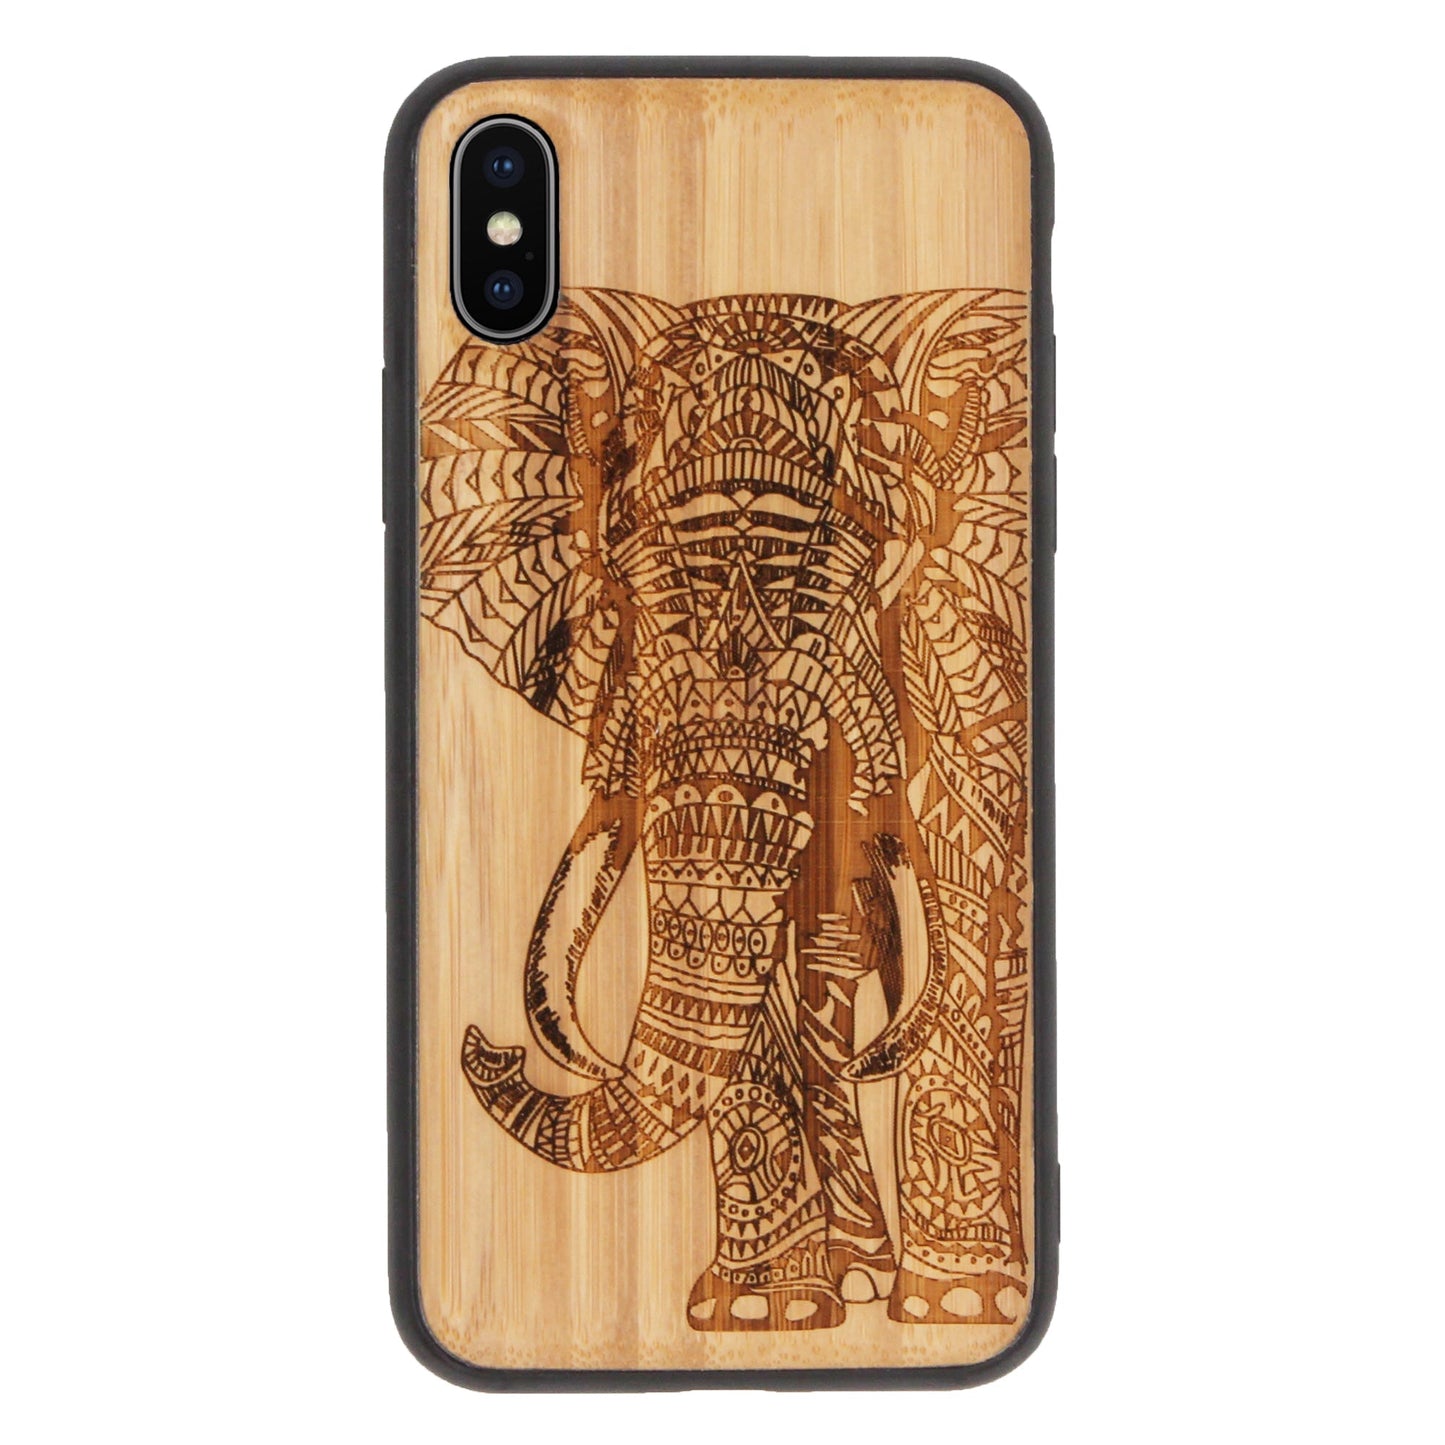 Bamboo Elephant Eden Case for iPhone XS Max